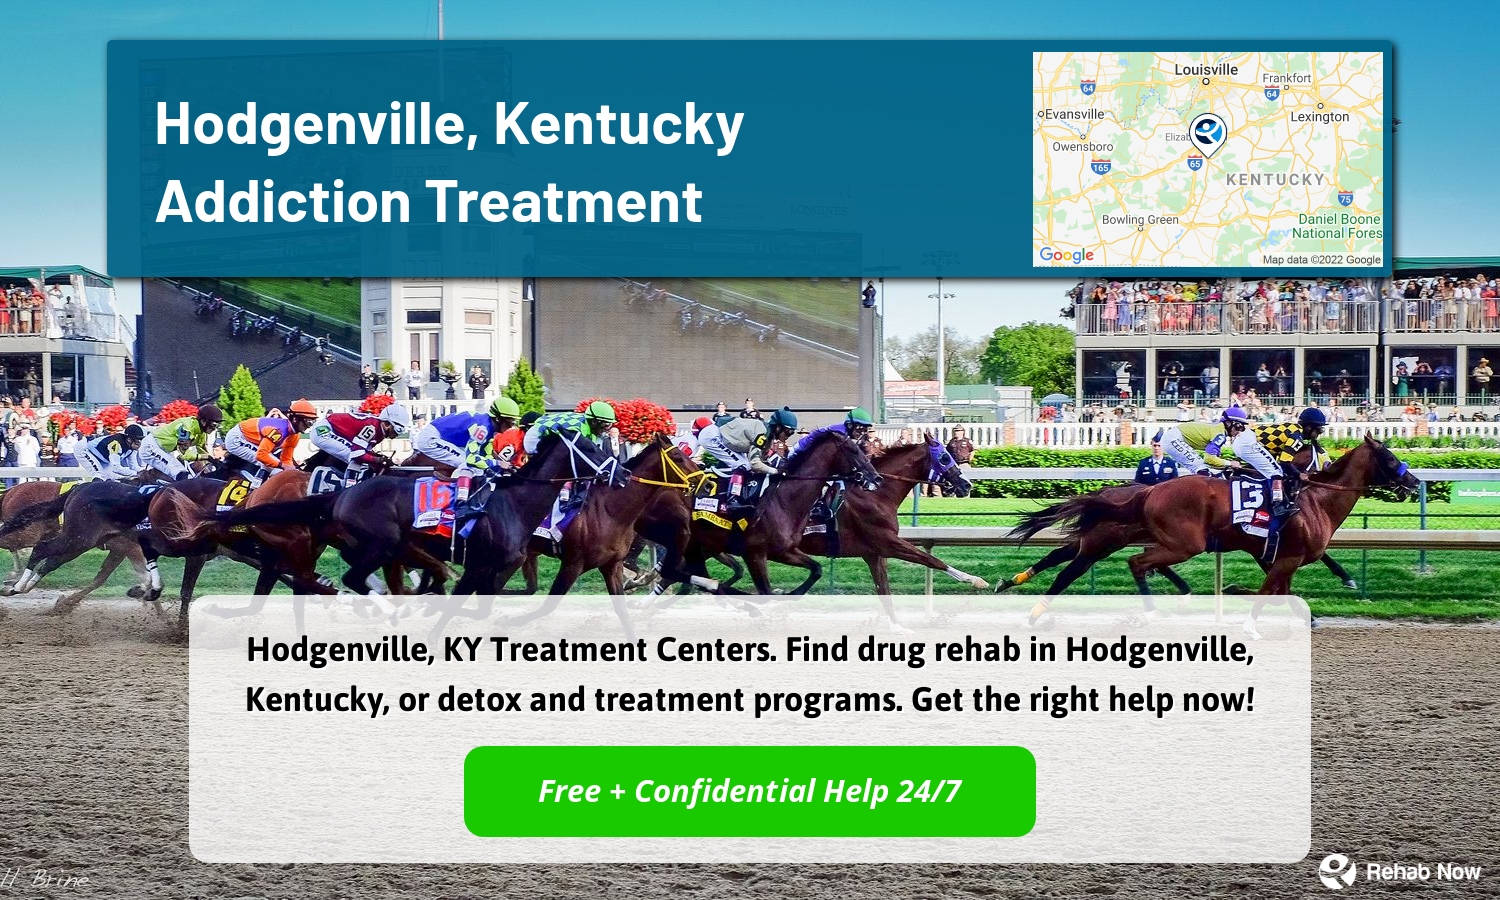 Hodgenville, KY Treatment Centers. Find drug rehab in Hodgenville, Kentucky, or detox and treatment programs. Get the right help now!